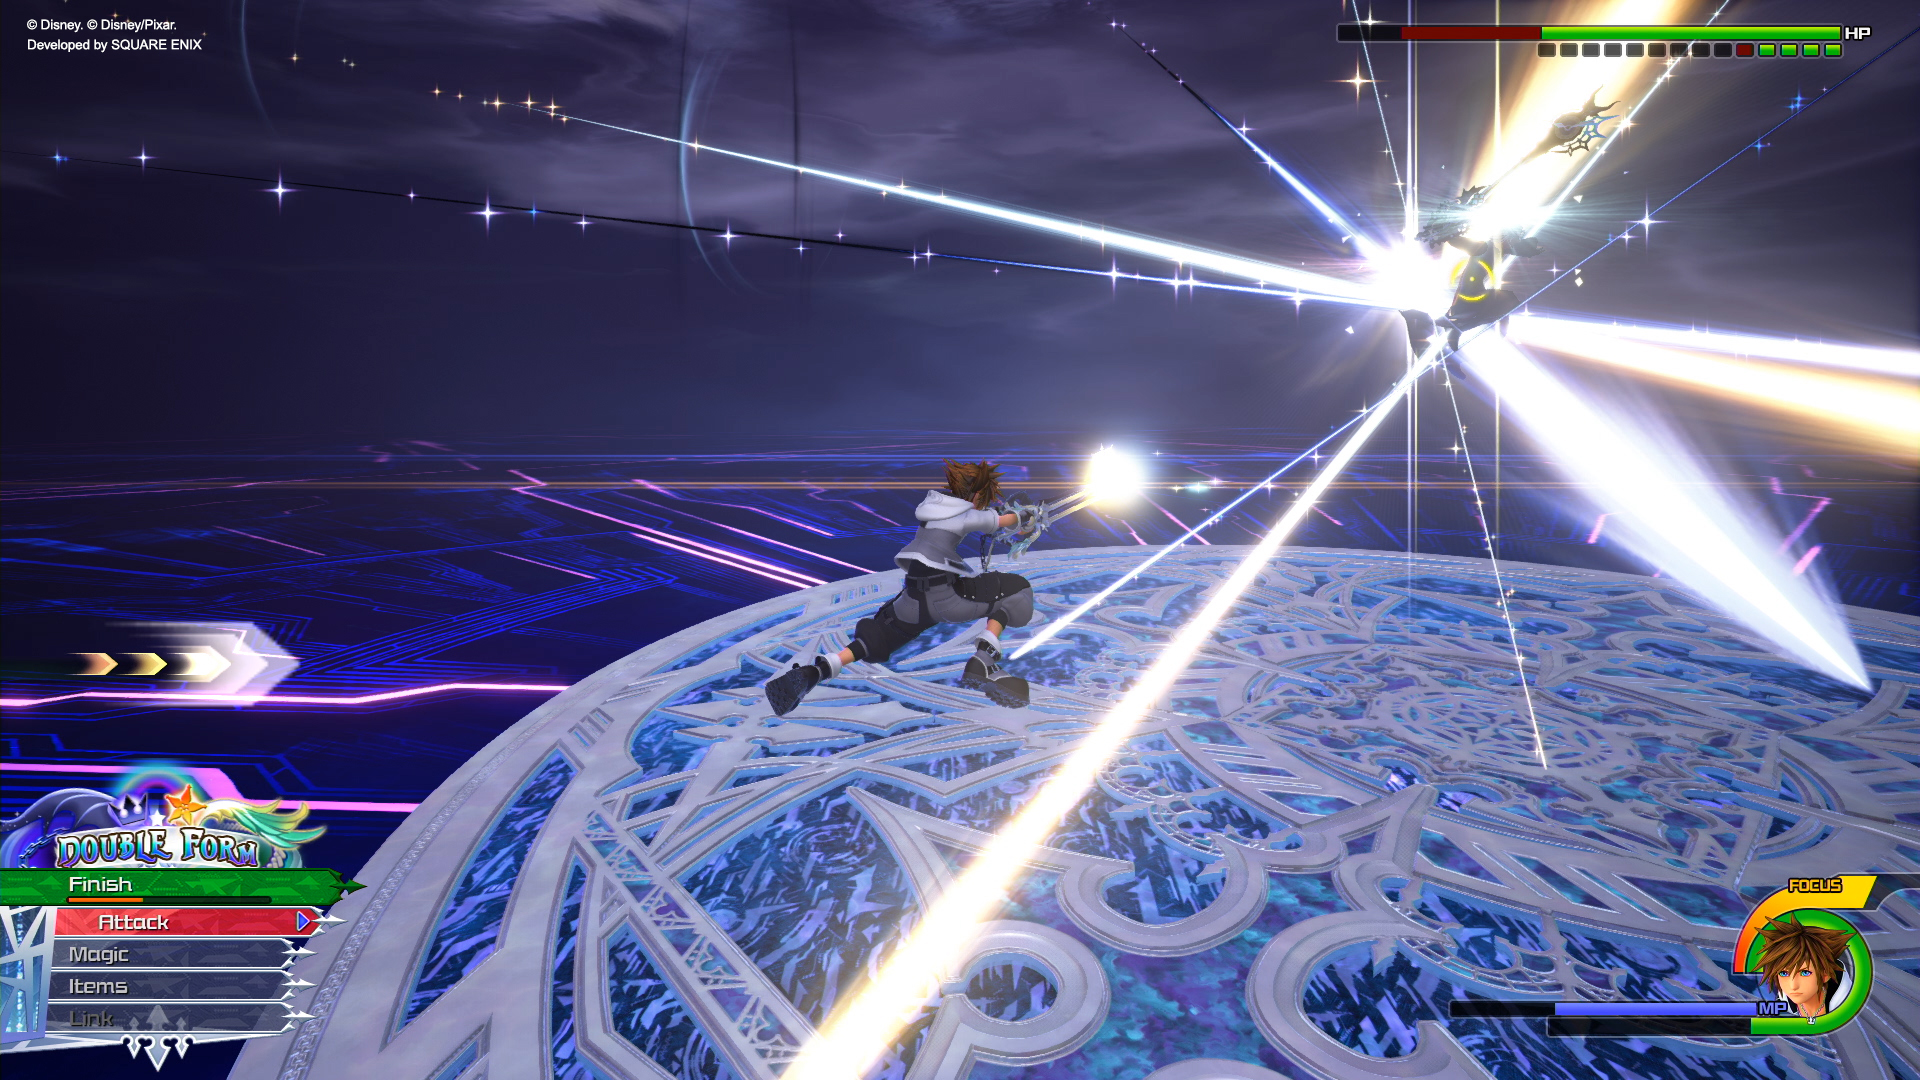 Update New Kingdom Hearts Iii Re Mind Screenshots Added To The Portal Site Double Form Slideshow Function Data Greeting And Premium Menu Info Added Translations Available Kingdom Hearts Iii Kingdom